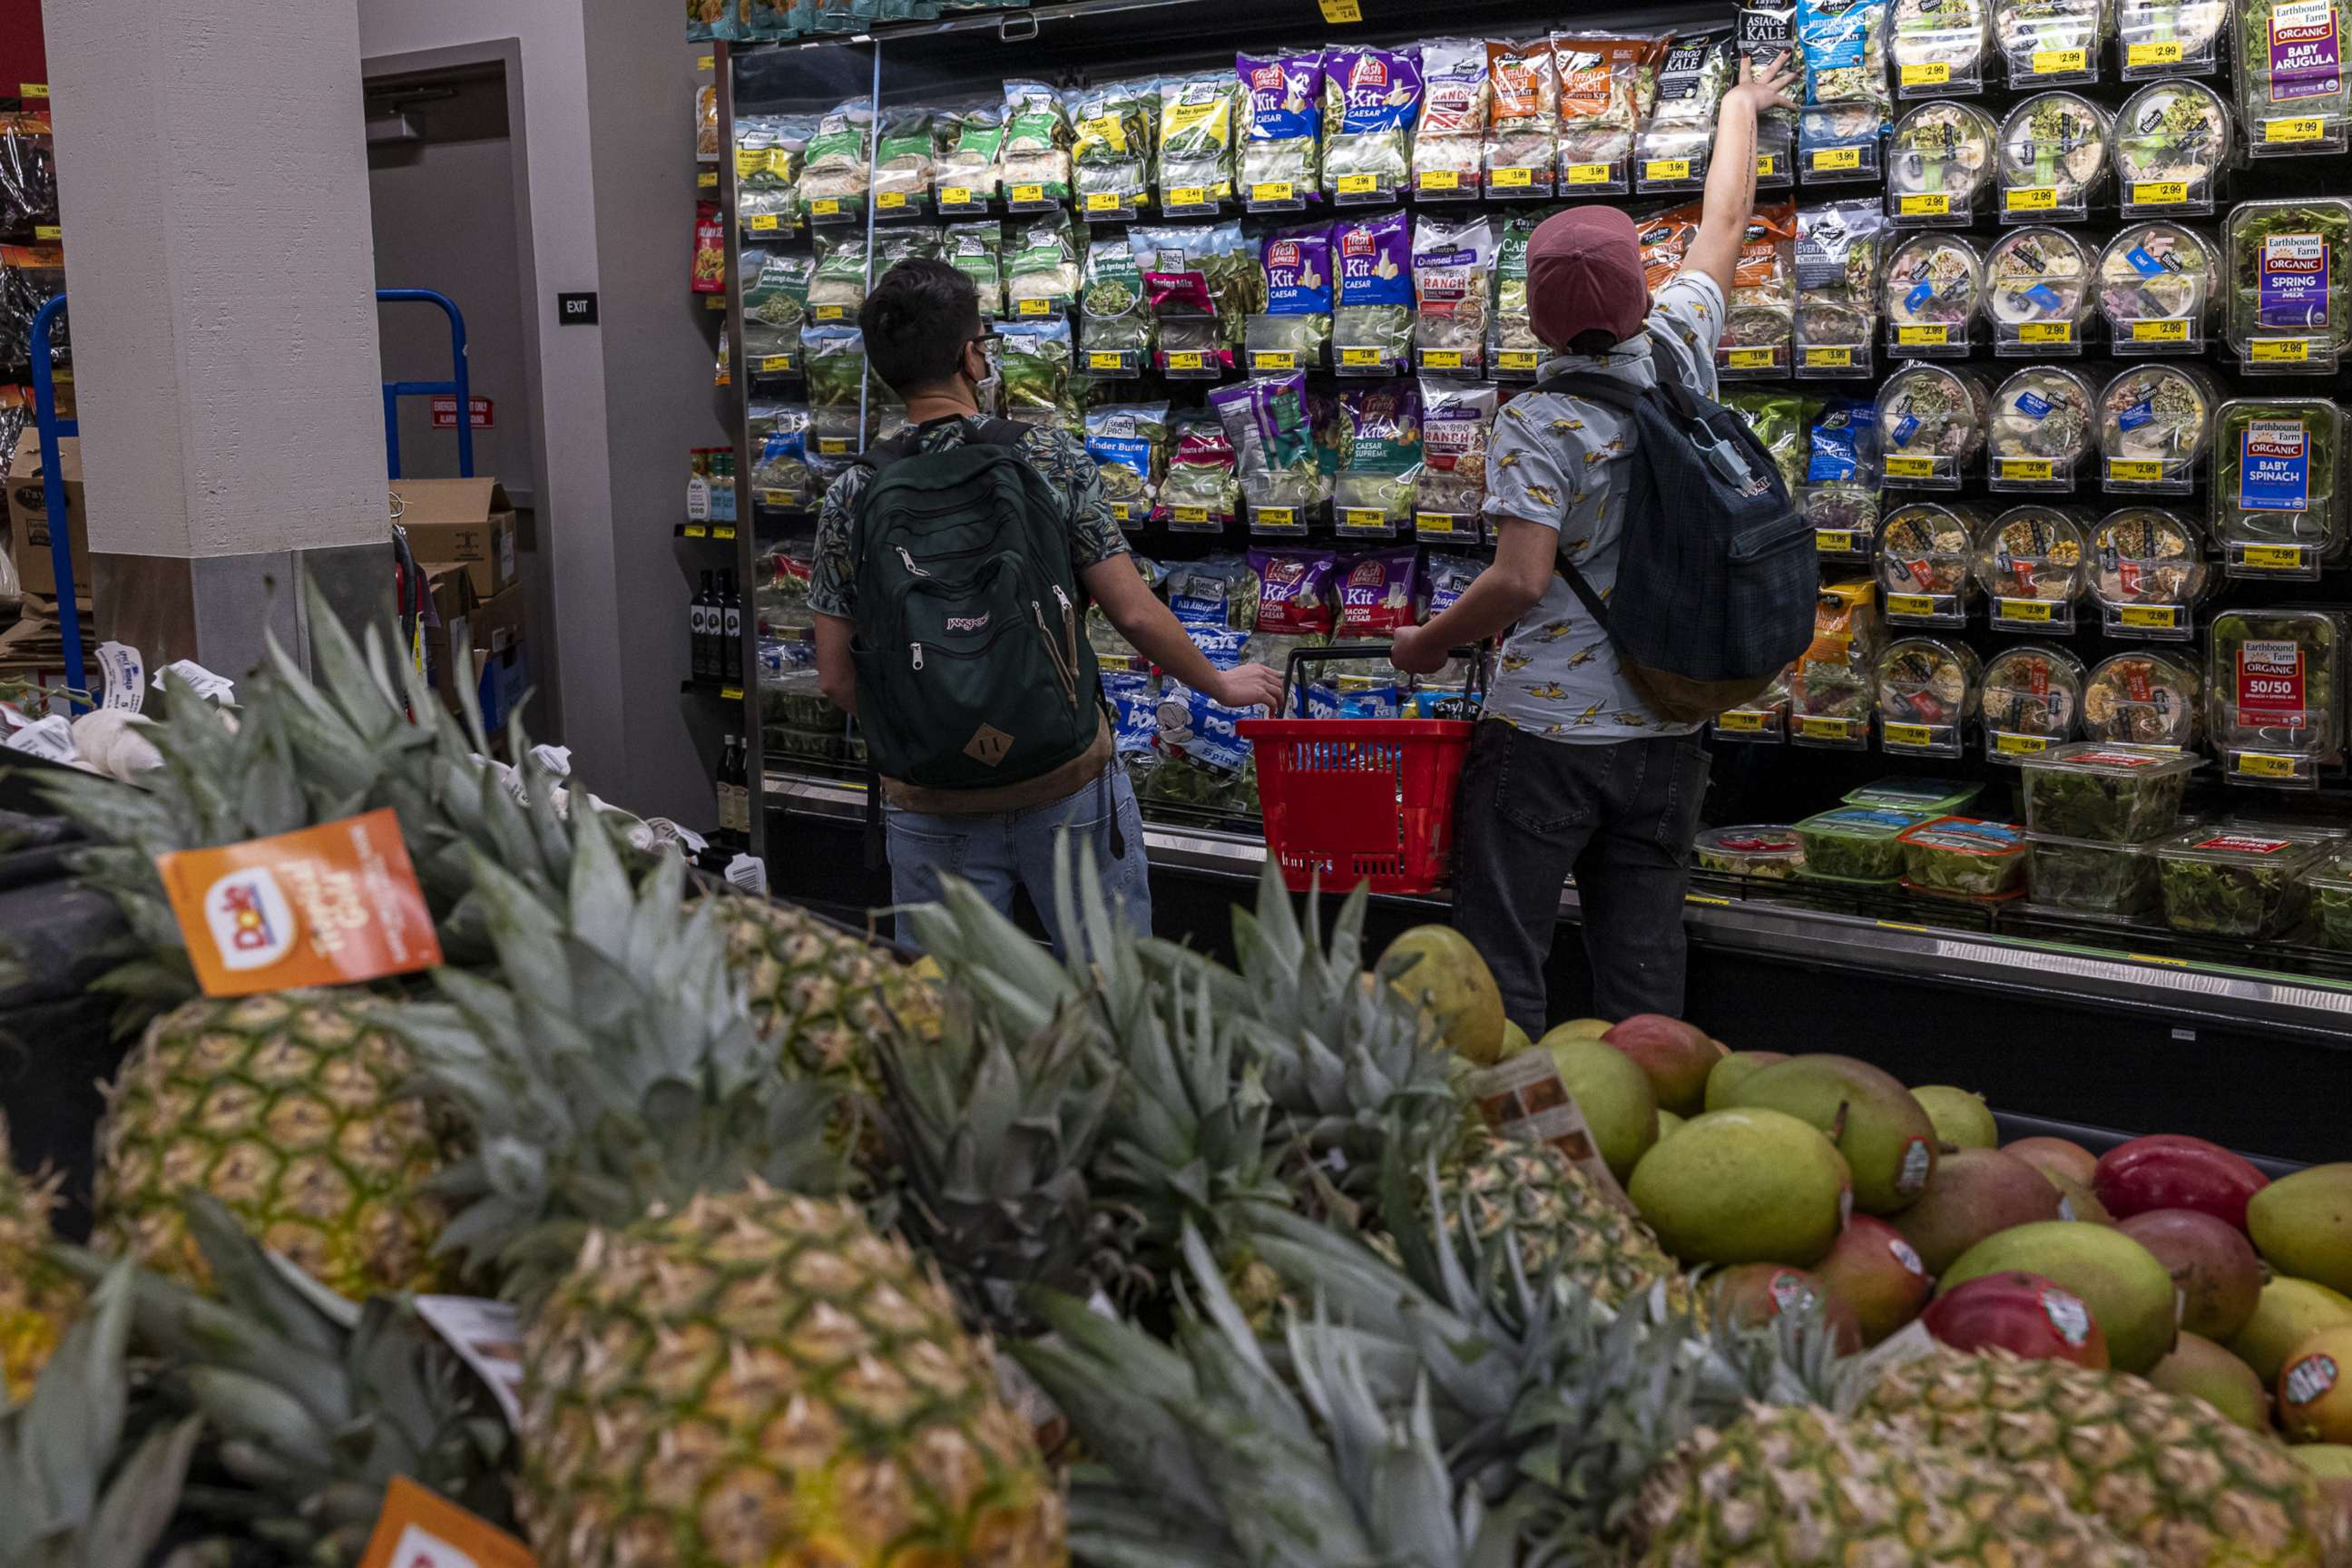 PHOTO: Customers shop for groceries at a store in San Francisco, Nov. 11, 2021.